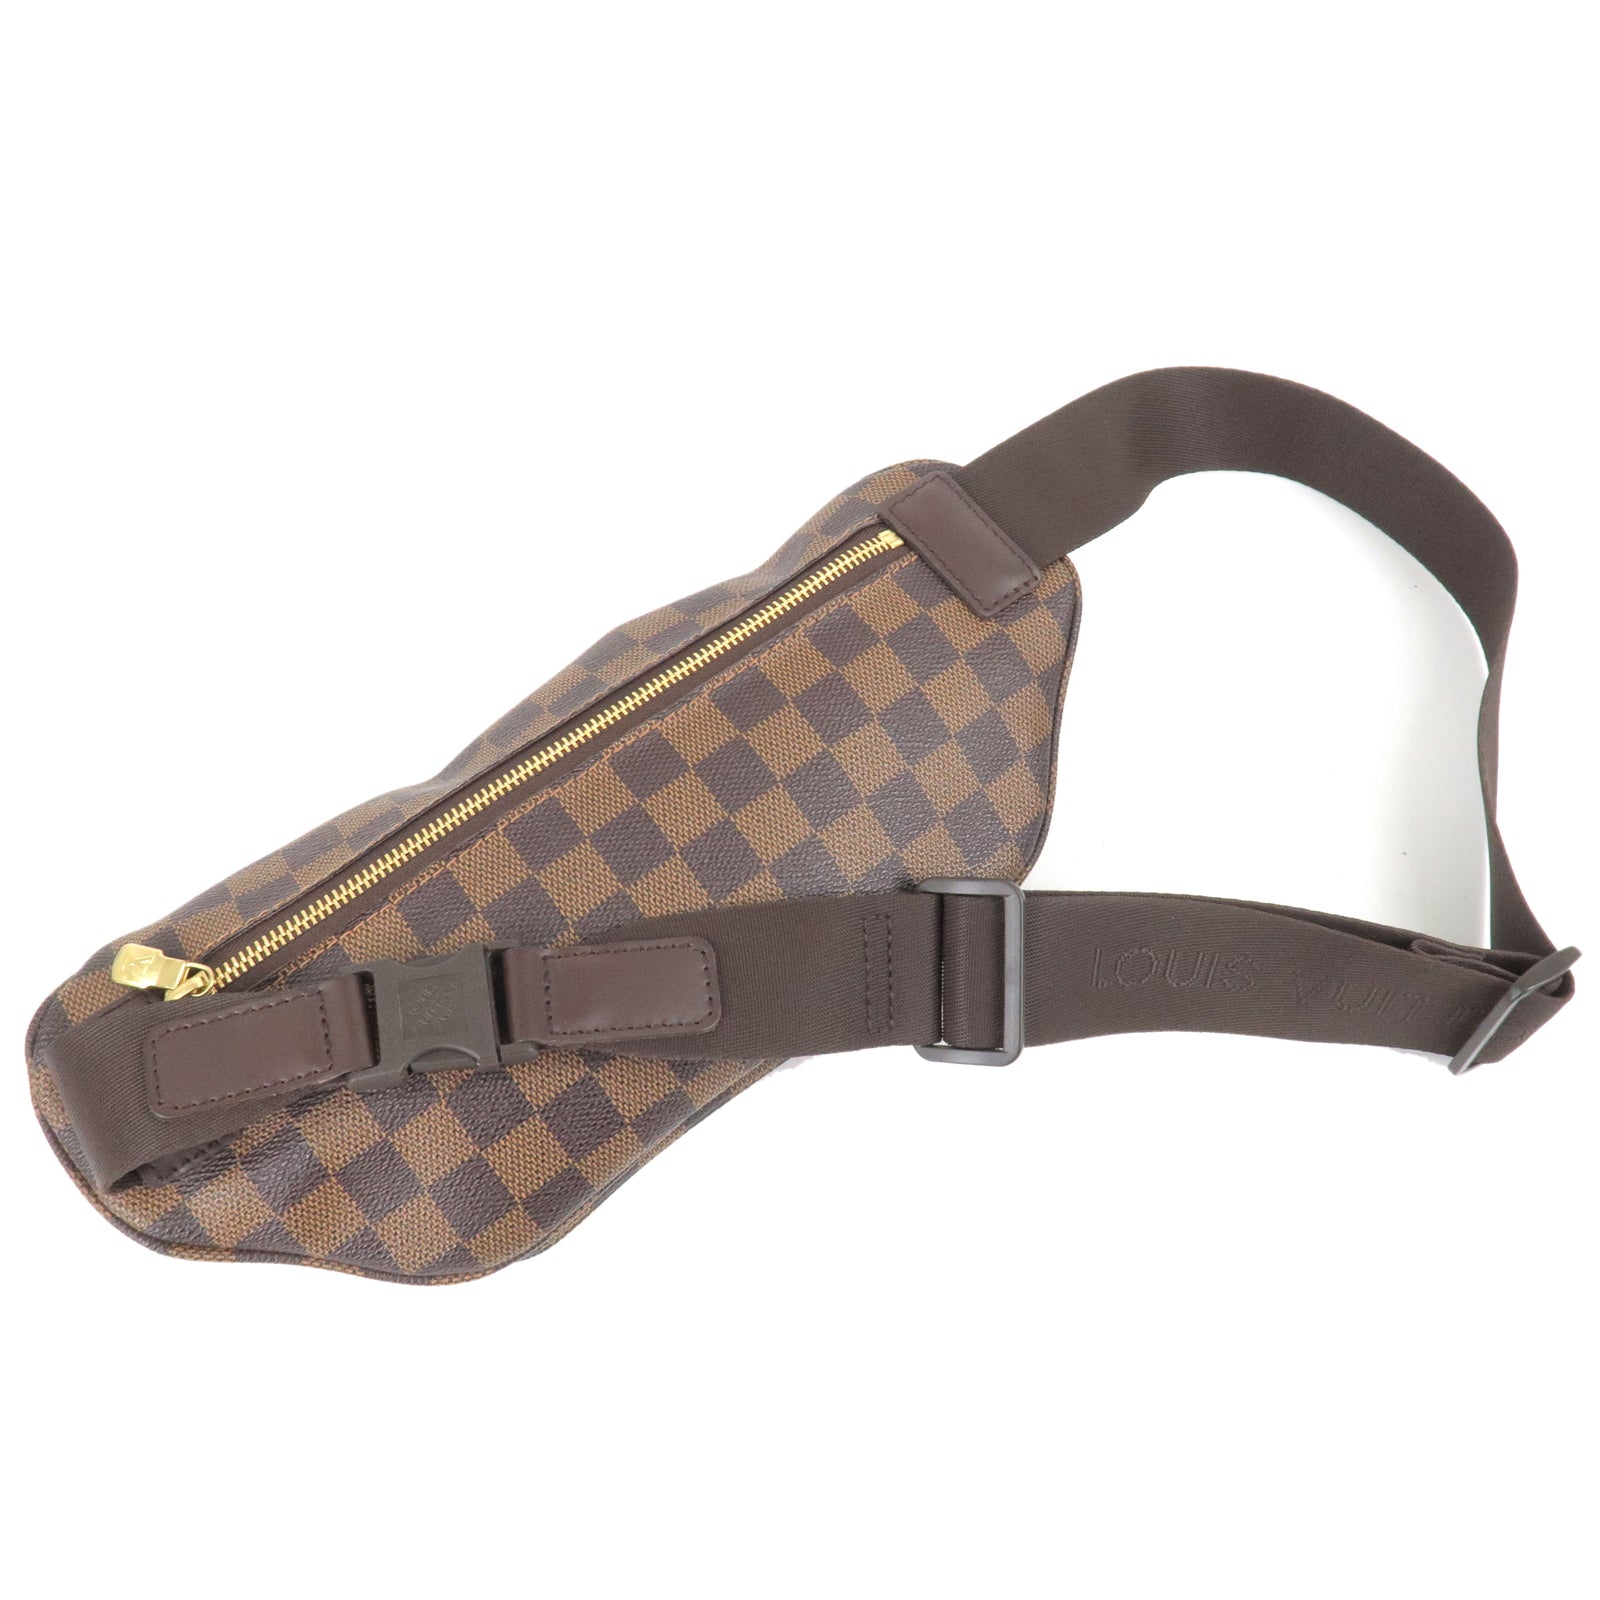 Louis Vuitton 2006 pre-owned Melville belt bag price in Doha Qatar